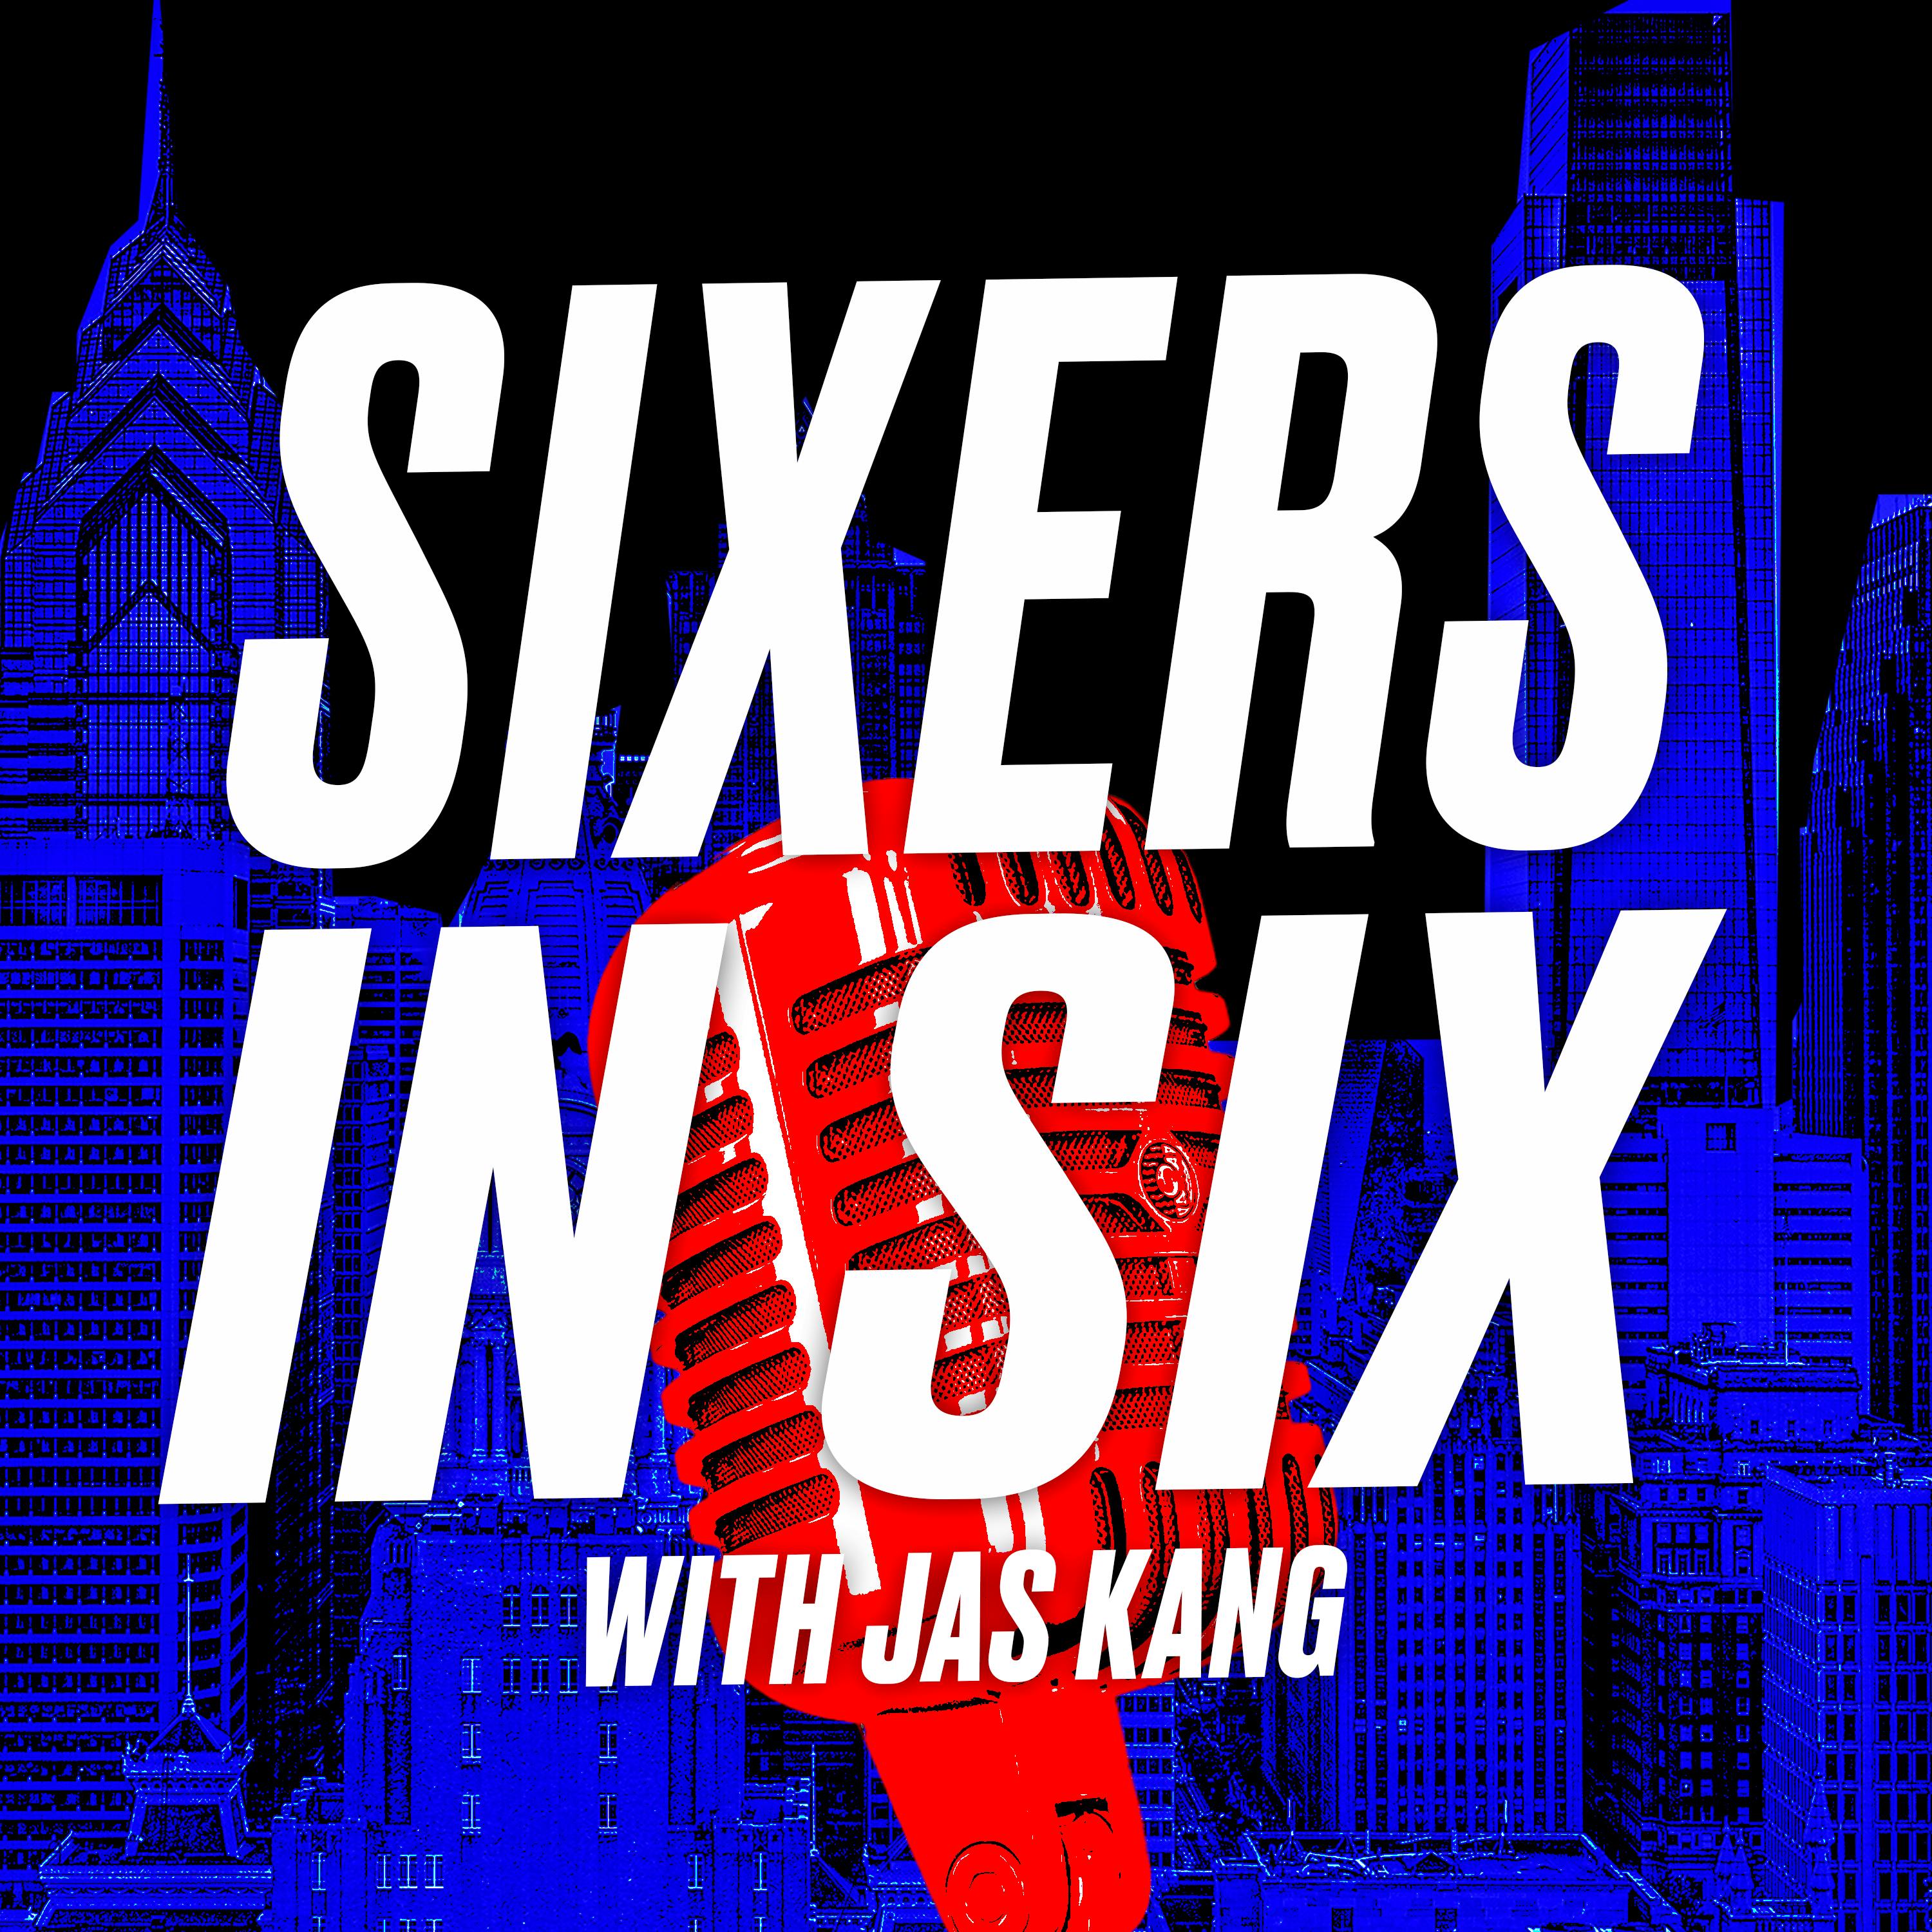 Joel Embiid scores 41, Tyrese Maxey's new role and the Sixers beat the Clippers to remain perfect on their West Coast road trip. Sixers in Six: With Jas Kang